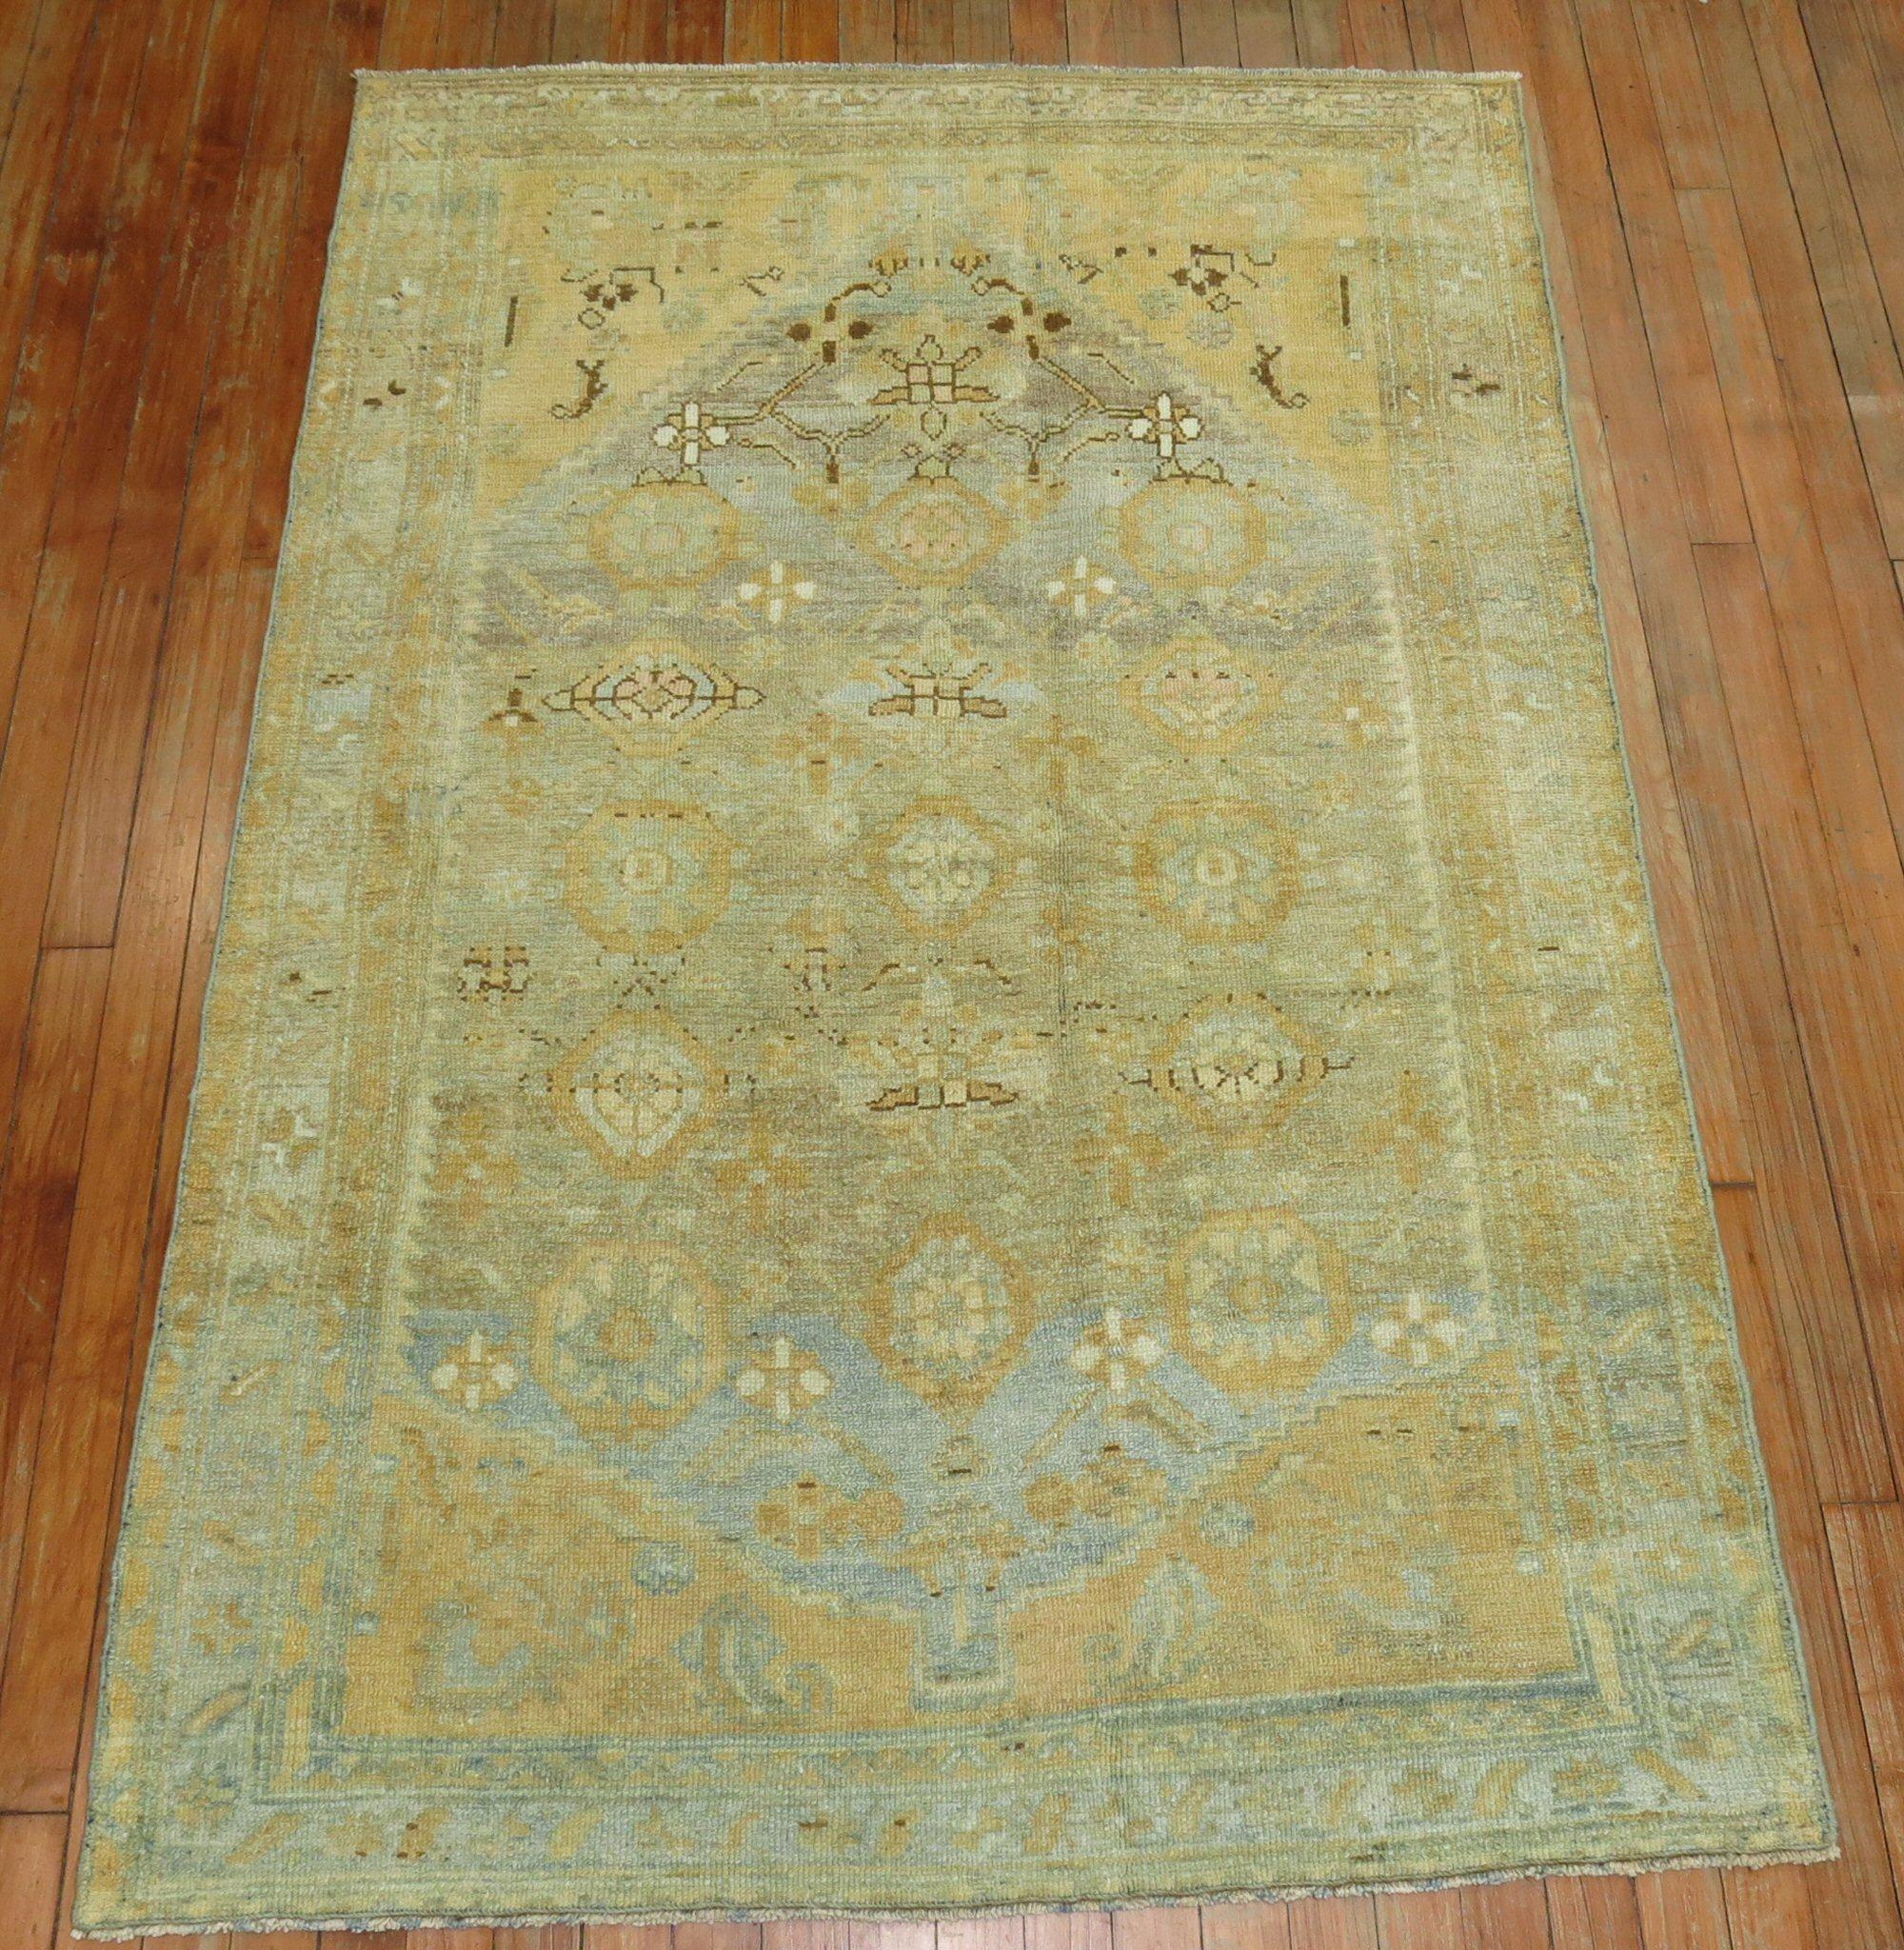 A throw size 20th century Persian Malayer rug with an all-over sun-faded mini-khani design in sand and light blue predominant accents

Measures: 3'7” x 5'3”.